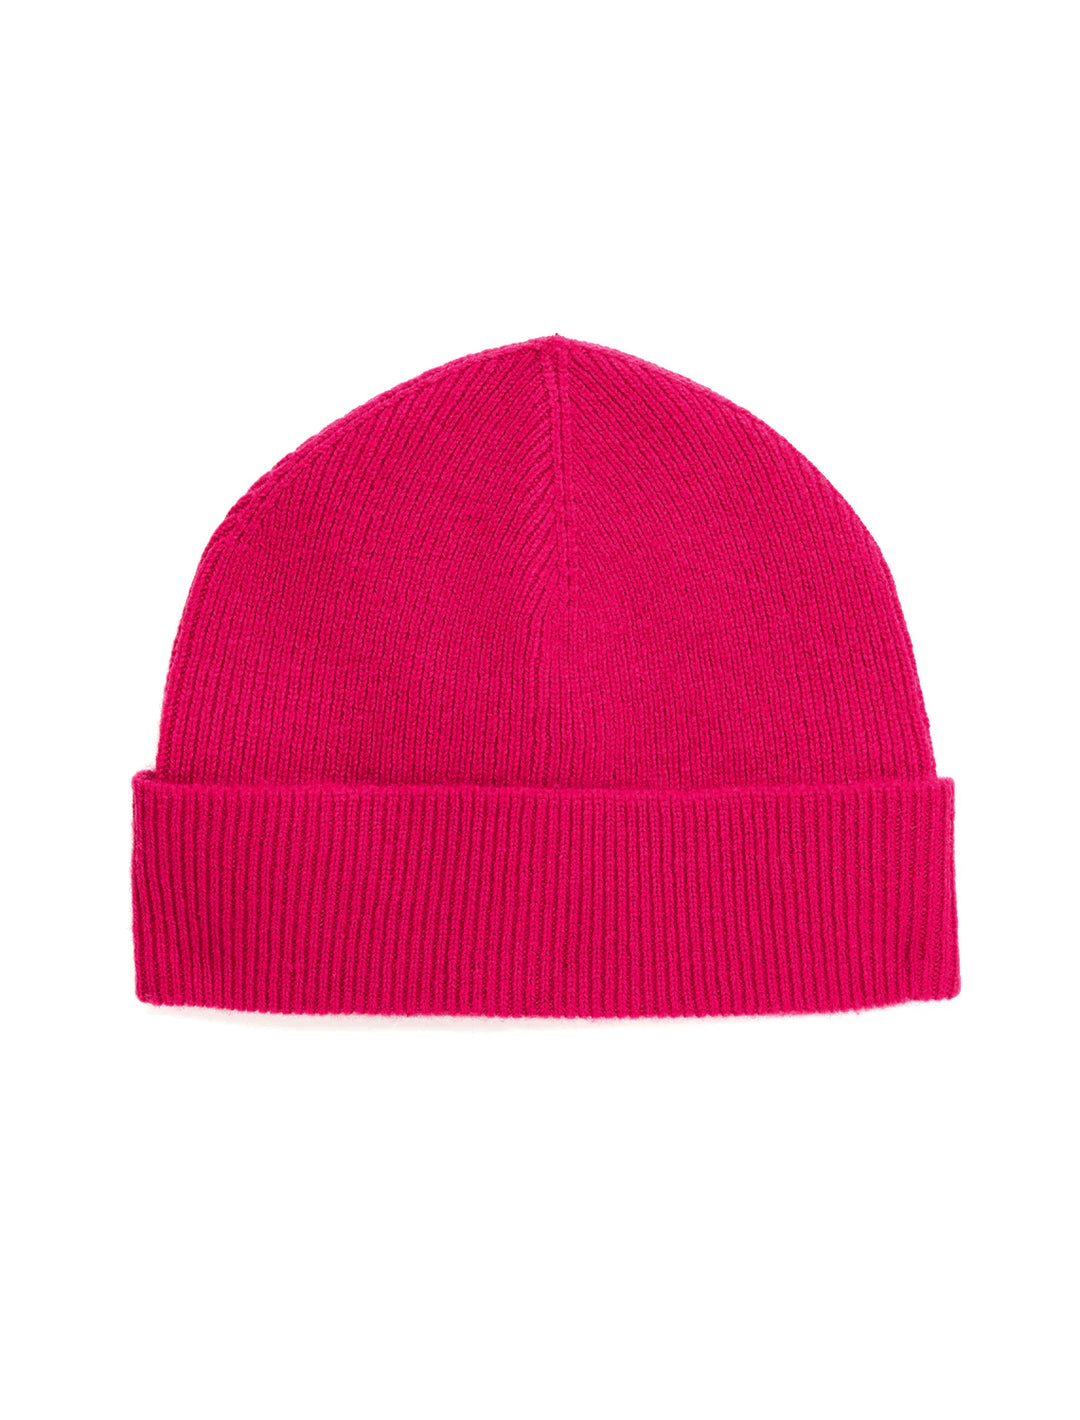 Front view of Jumper 1234's ribbed turnback hat in cherry.